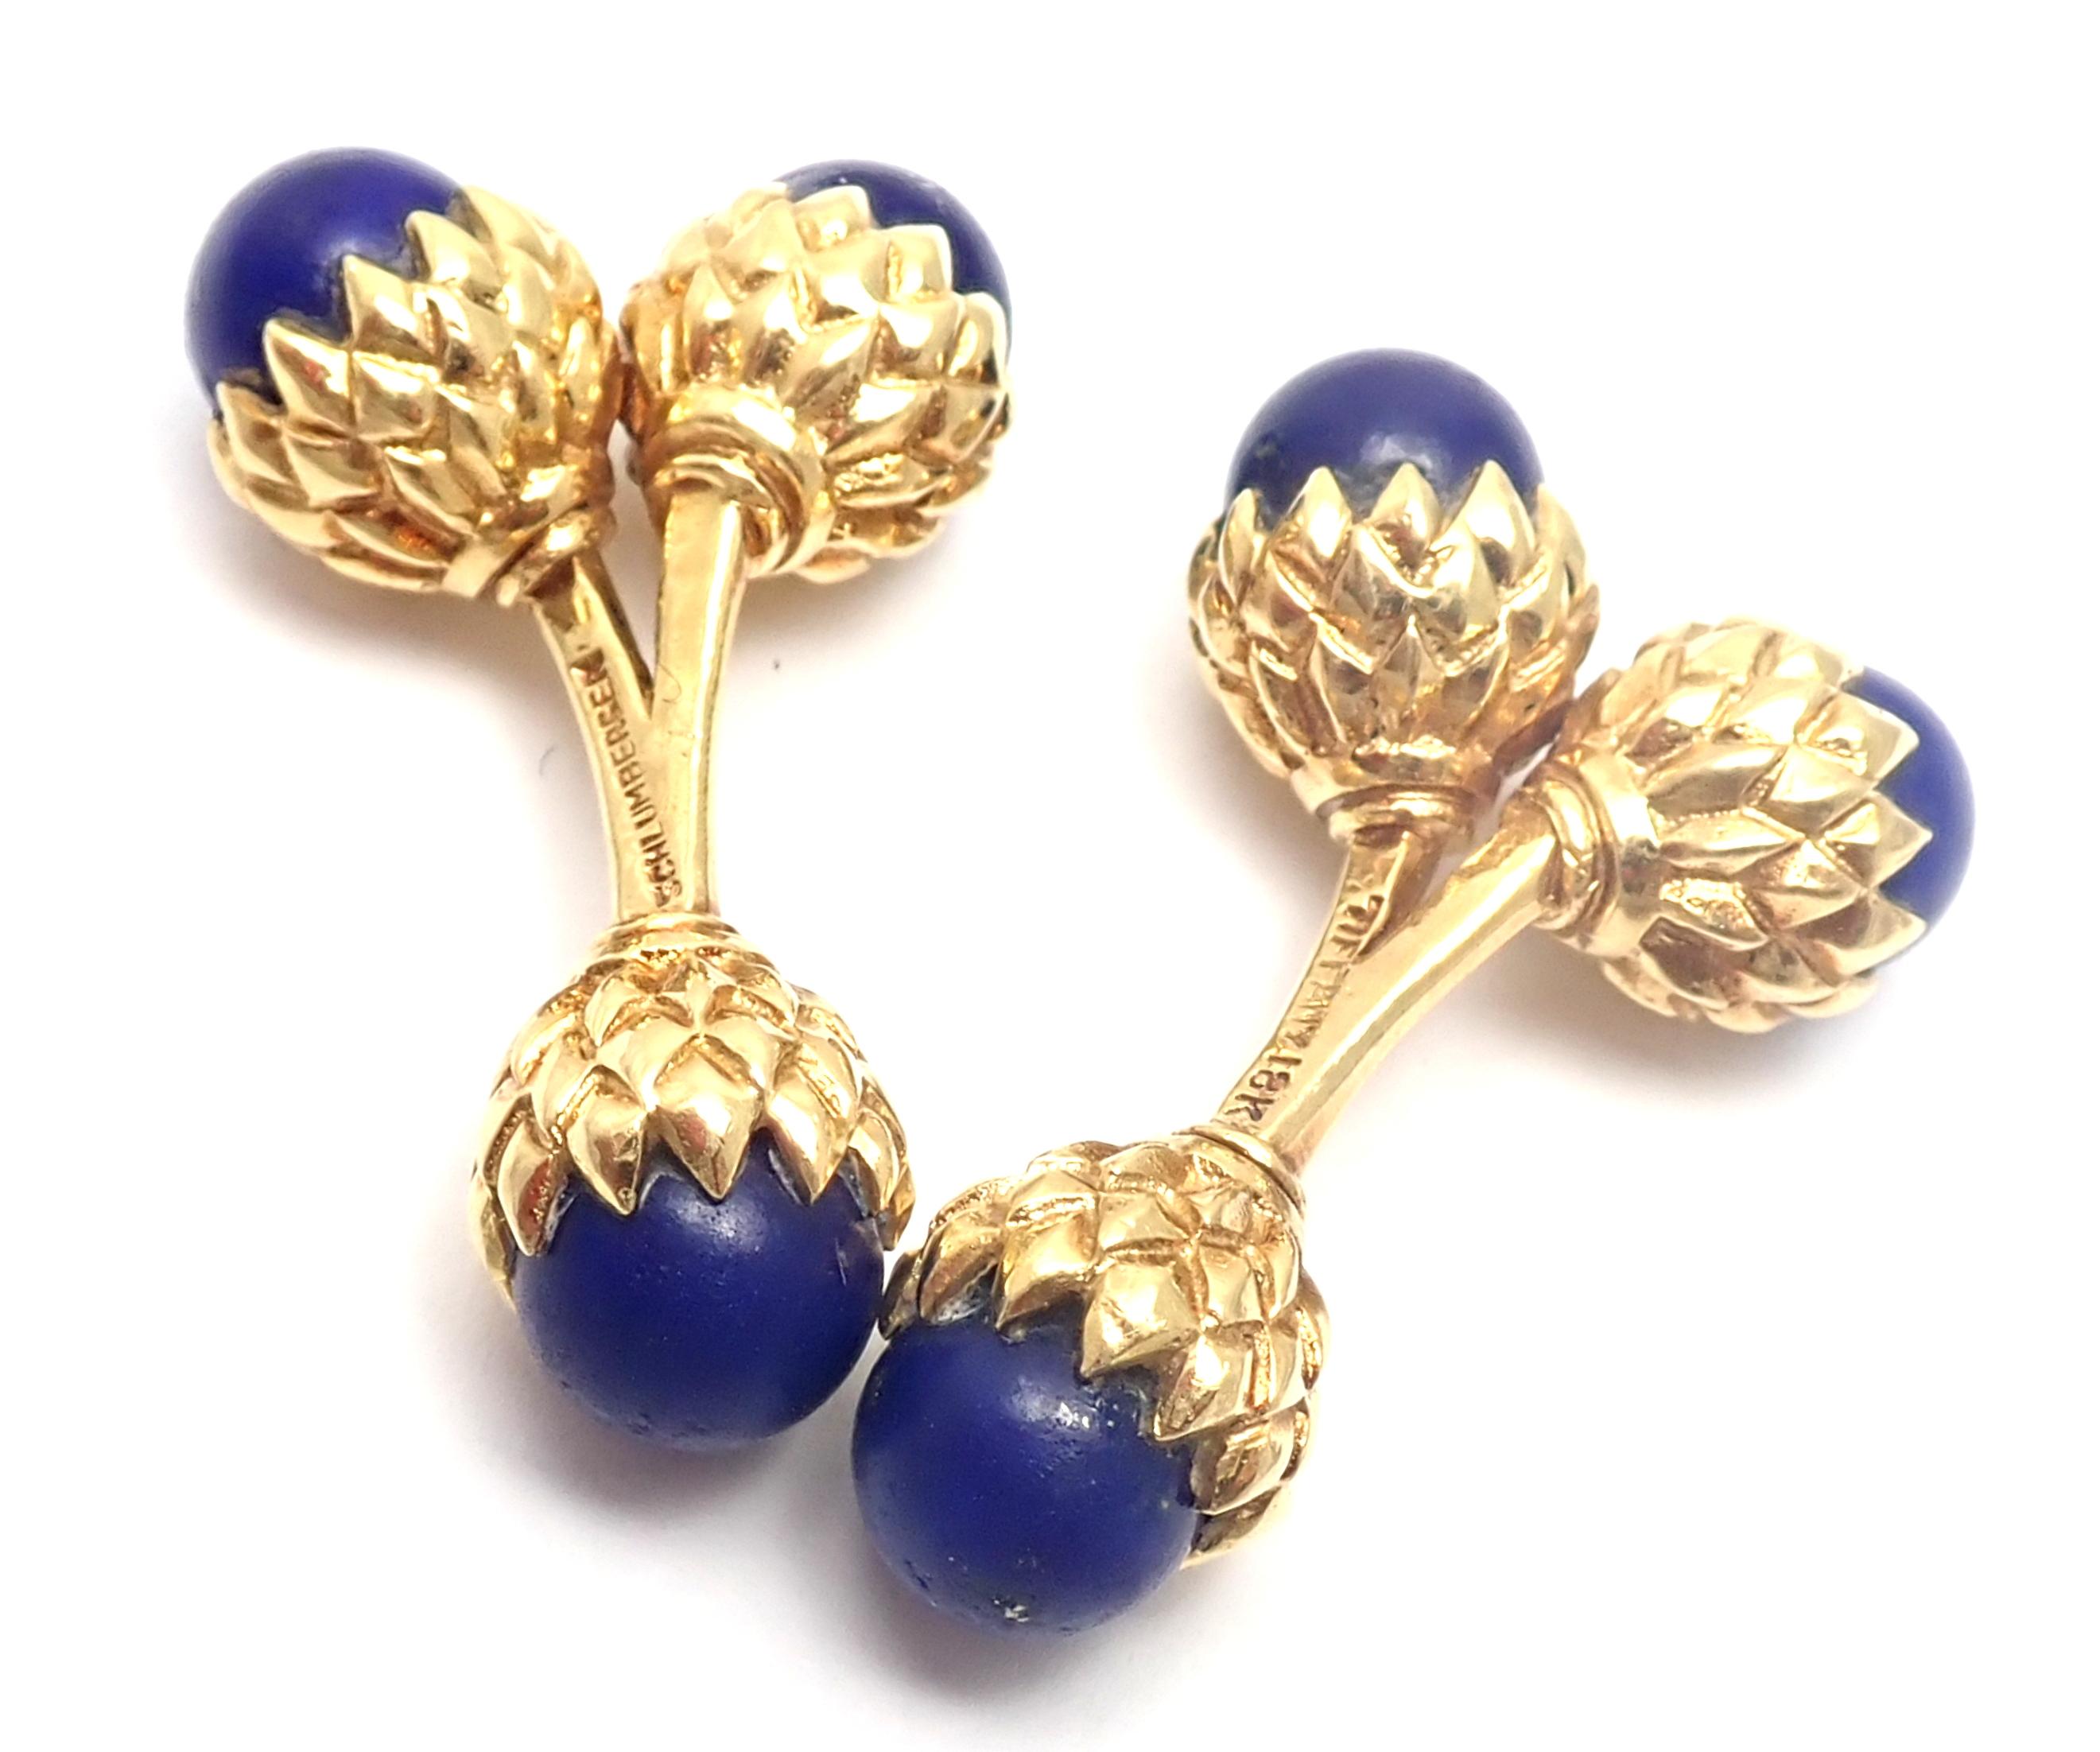 18k Yellow Lapis Lazuli Jean Schlumberger Double Acorn Cufflinks 
for Tiffany & Co. 
With 6 lapis lazuli stones 
Details: 
Dimensions: 31mm x 19mm x 19mm
Weight: 15.6 grams
Stamped Hallmarks: Tiffany Schlumberger 18k
*Free Shipping within the United